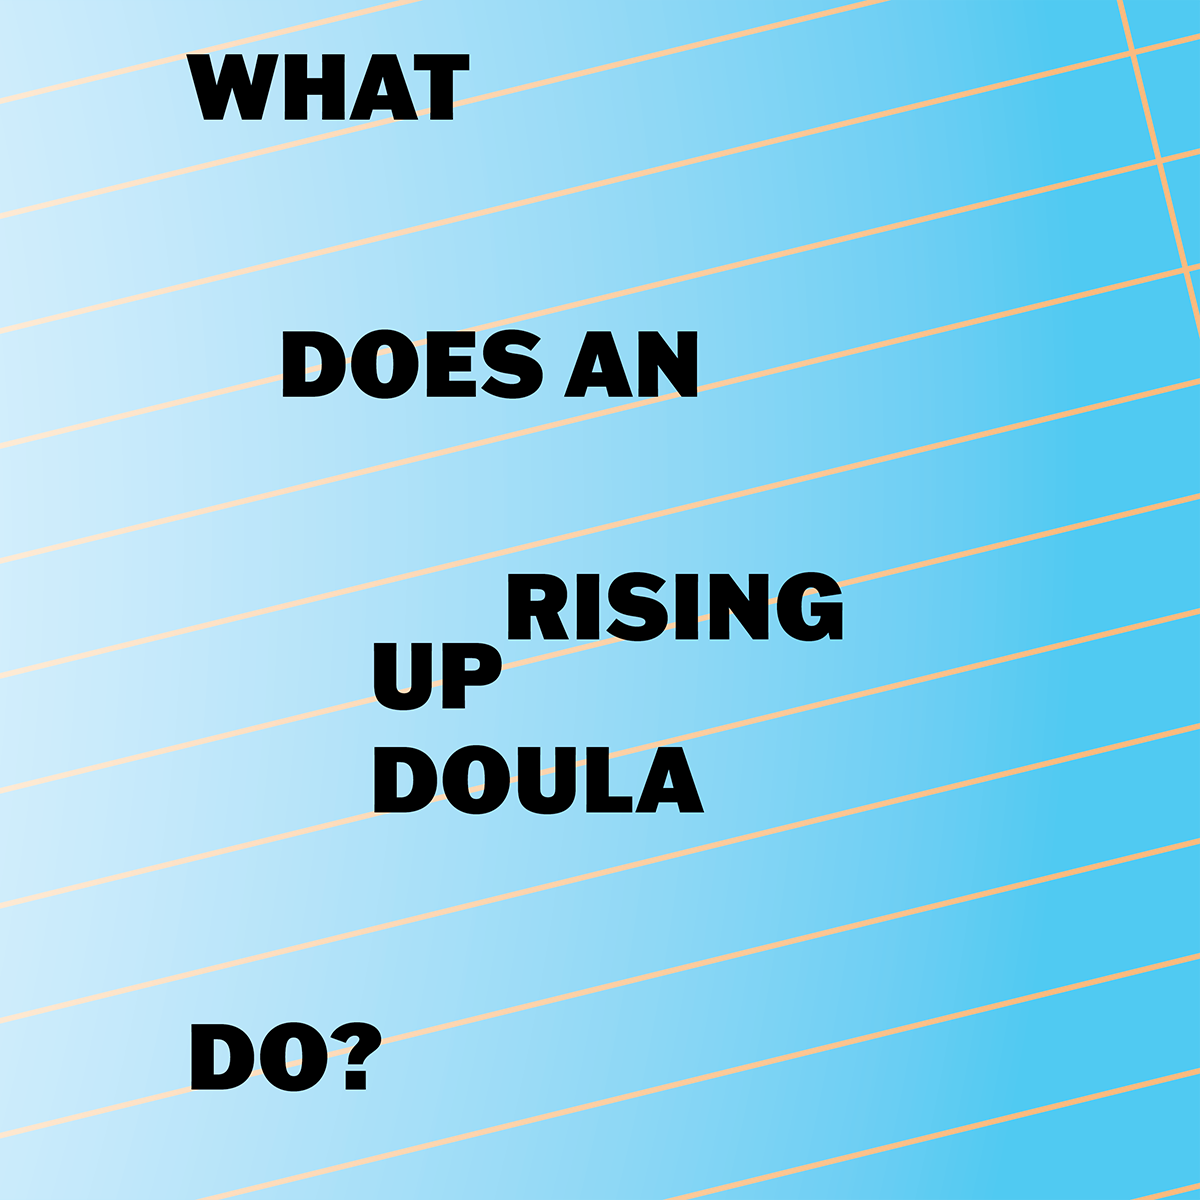 white to blue gradient ombre background. What Does An Uprising doula Do? in bold printed three times horizontally